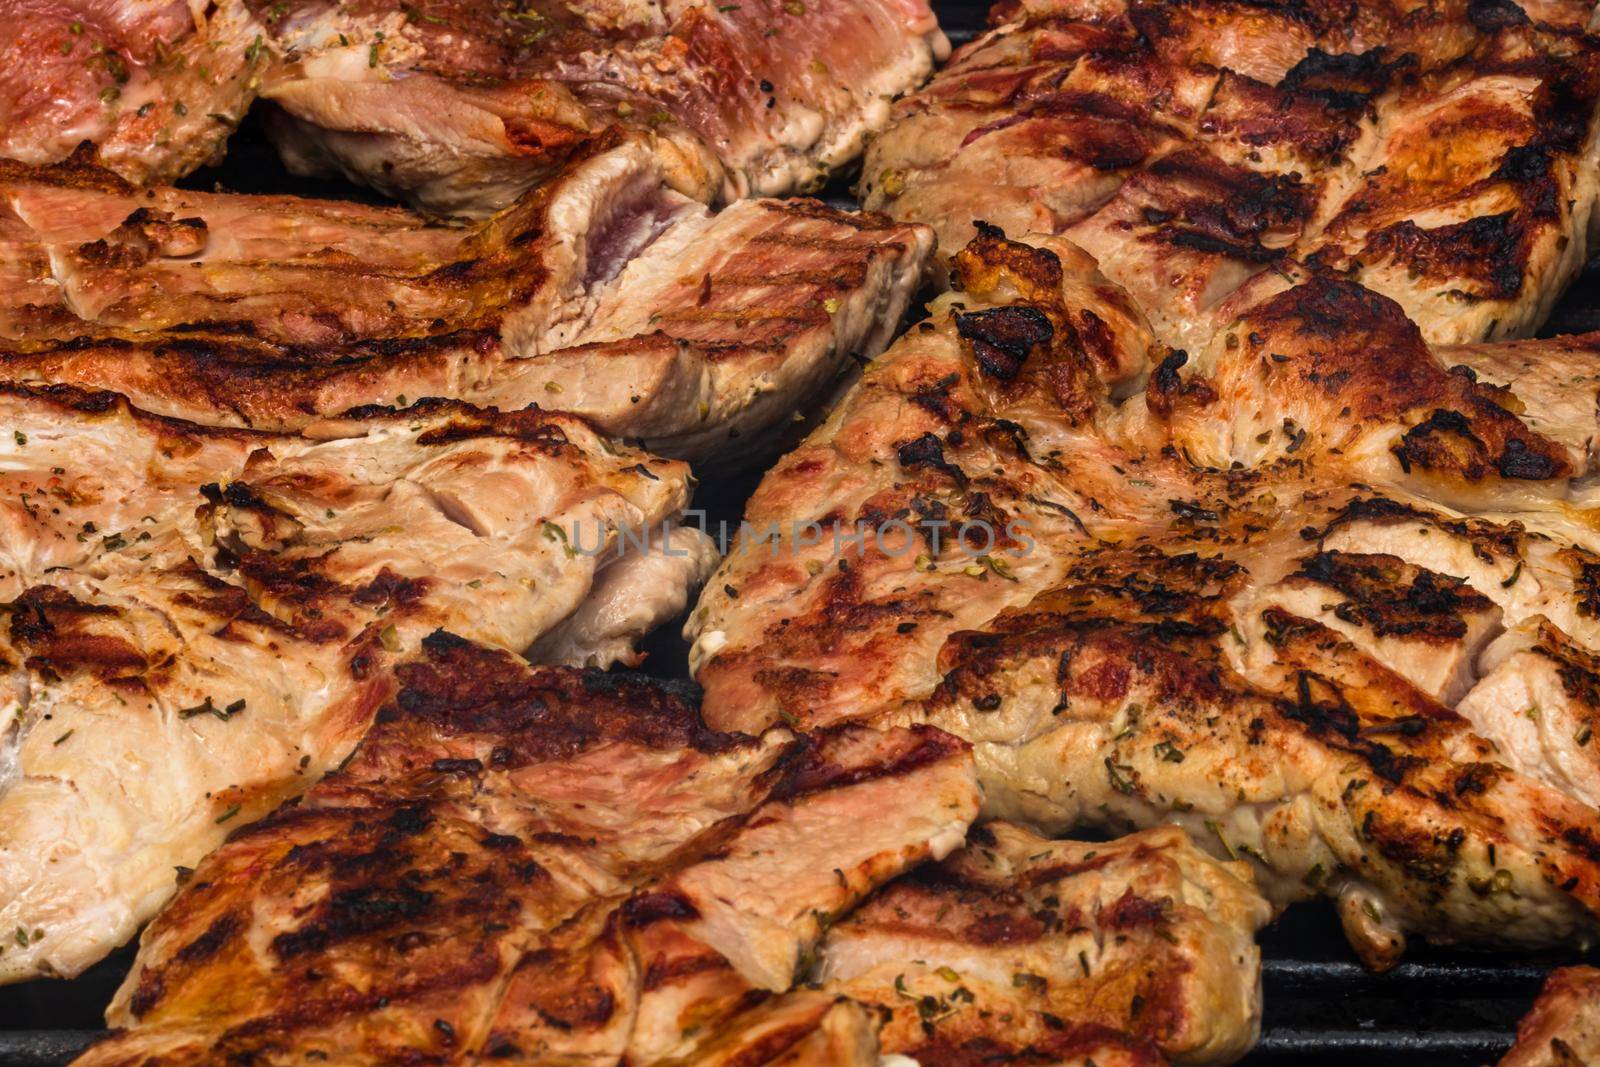 Close up of pork steak grilled on a charcoal barbeque isolated.